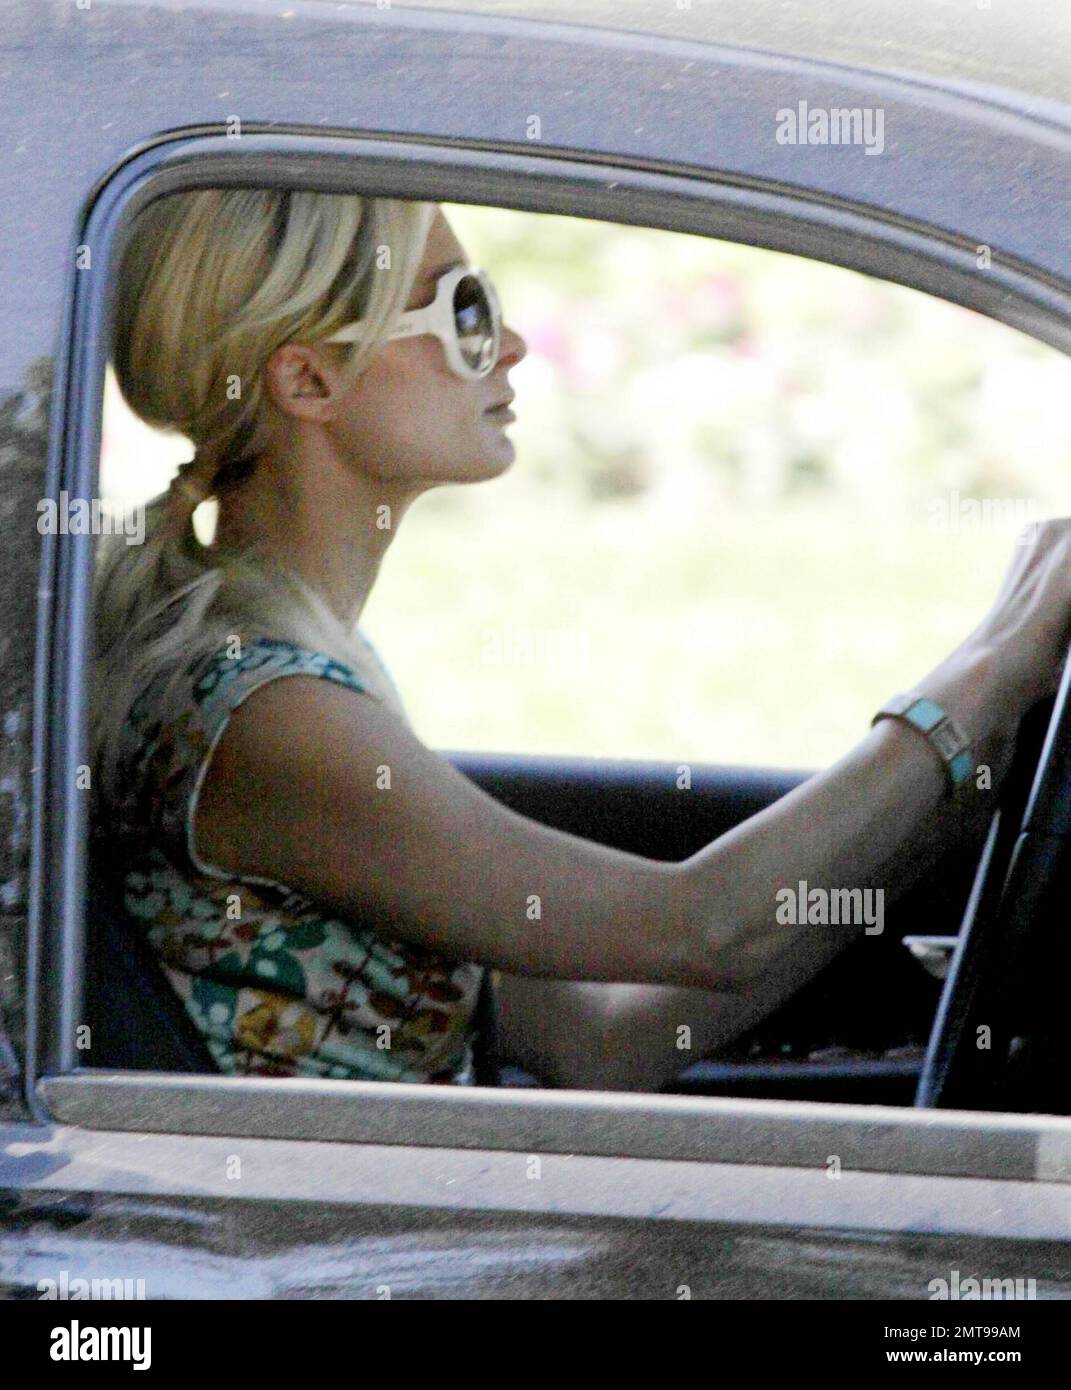 EXCLUSIVE!! Paris Hilton drives out of her gated community, the first  pictures of Hilton since the odd and aggressive acts that occurred at her  home this morning. According to reports a man